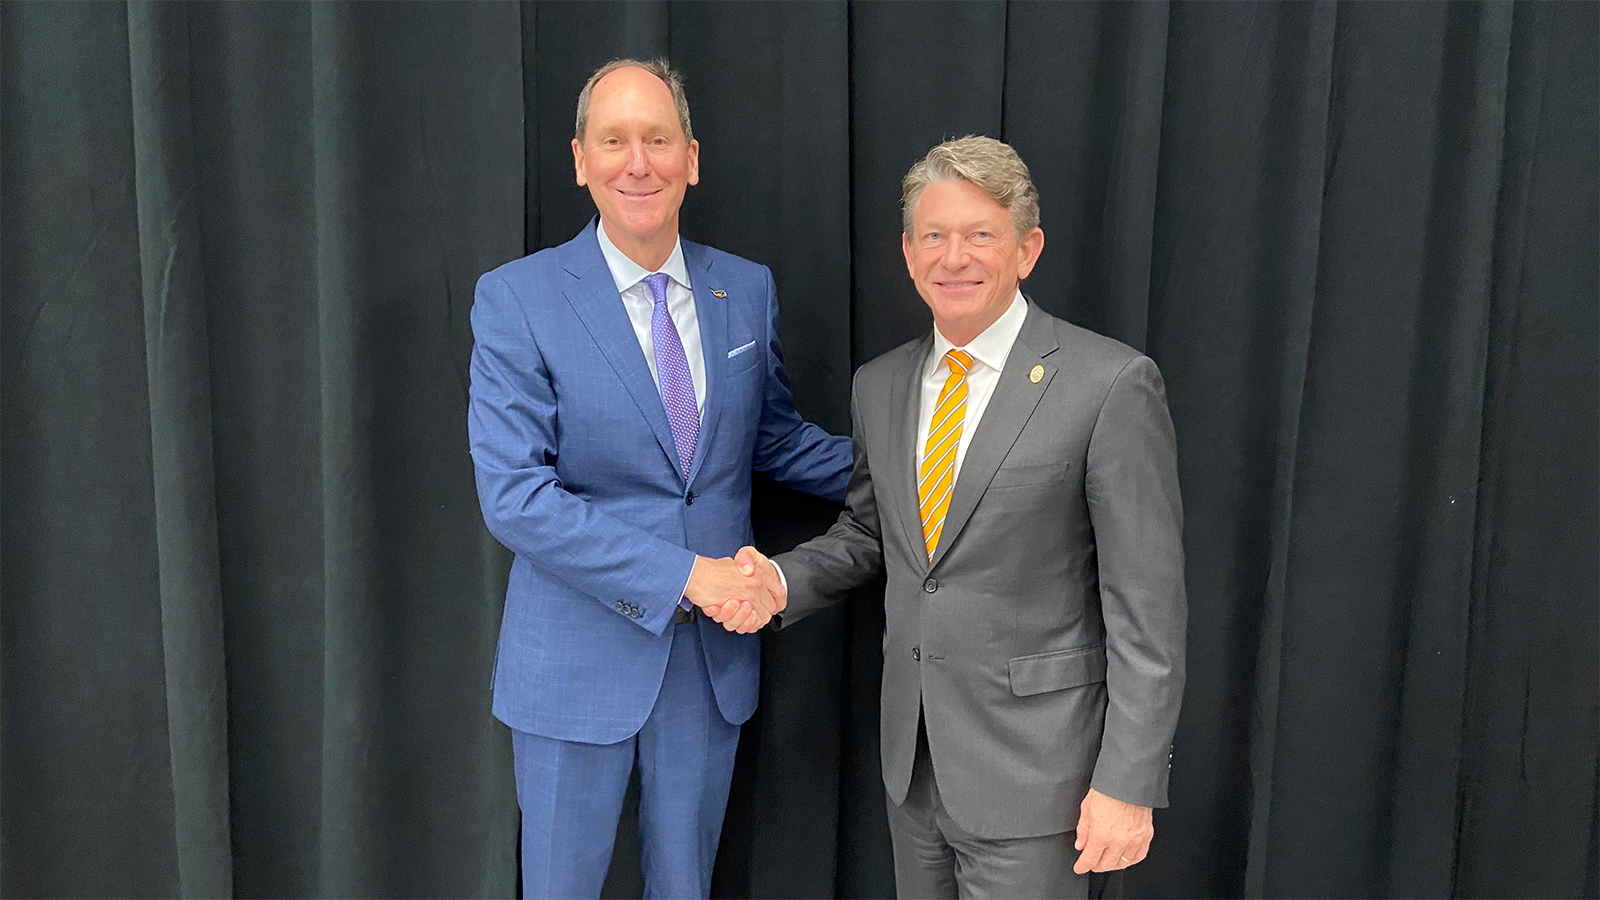 UT System President Randy Boyd shakes hands with UT Board of Trustees Chair John Compton.